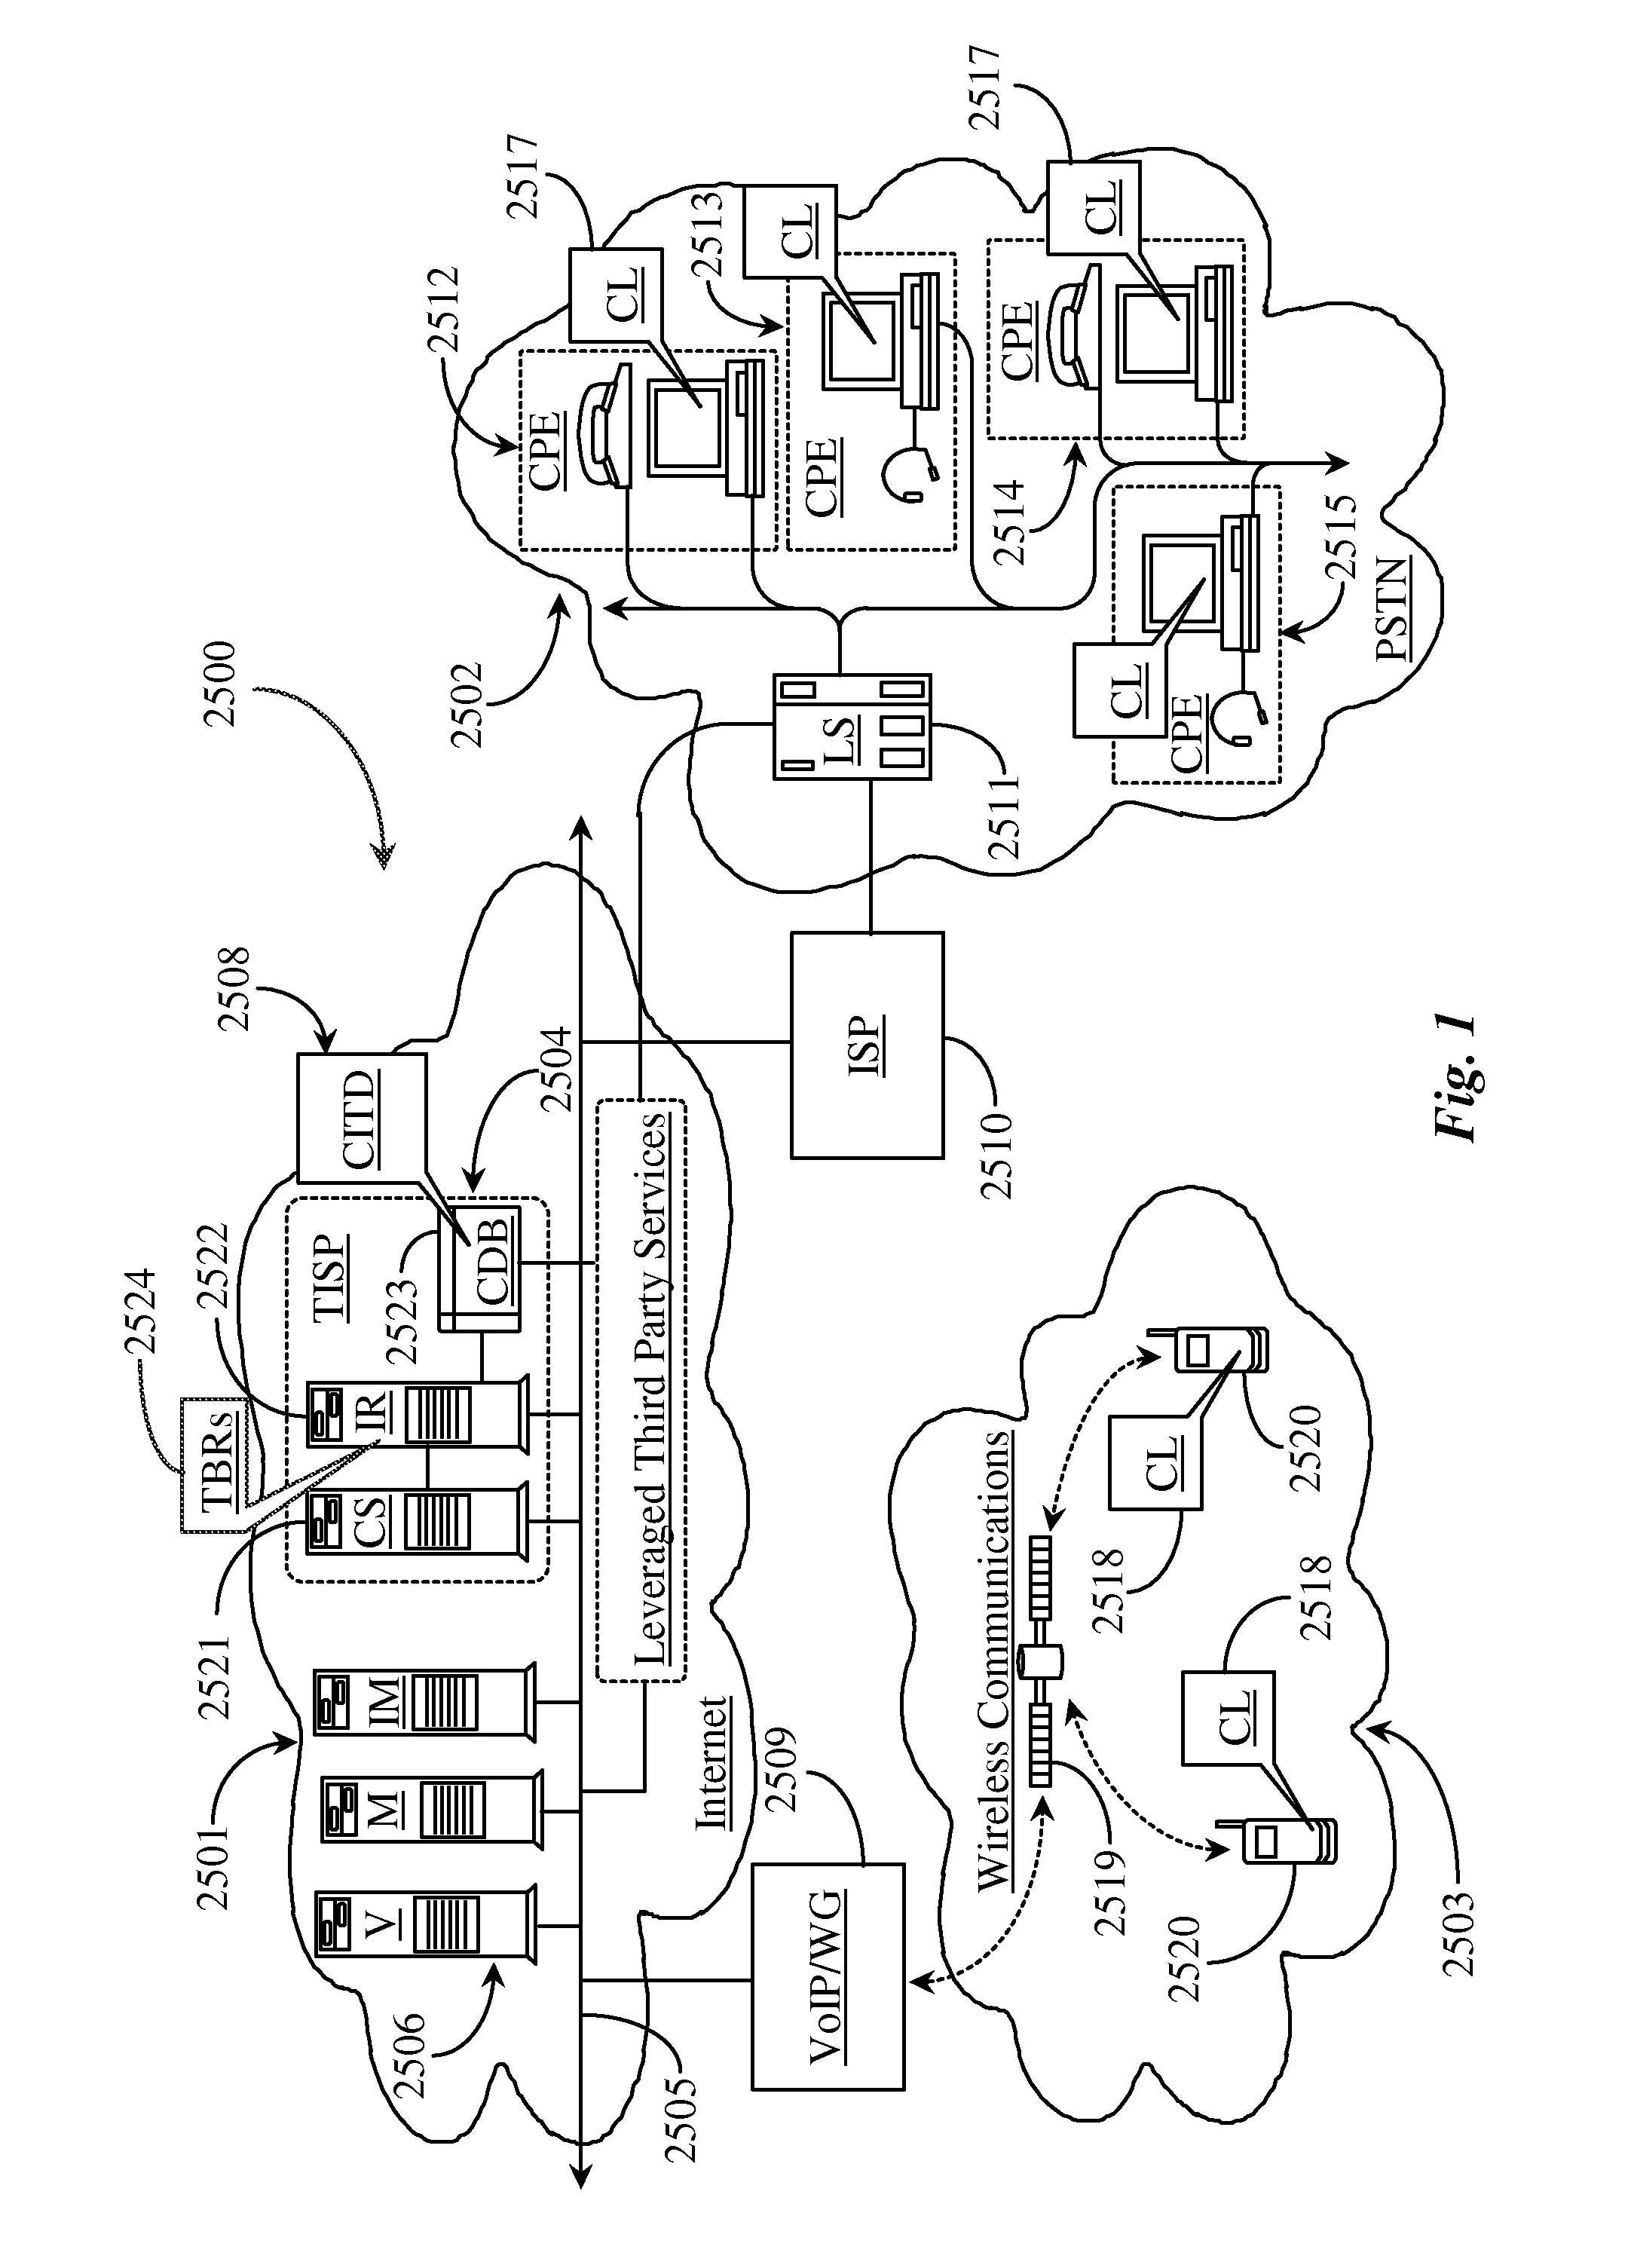 Methods and Apparatus for Enabling a Dynamic Network of Interactors According to Personal Trust Levels Between Interactors